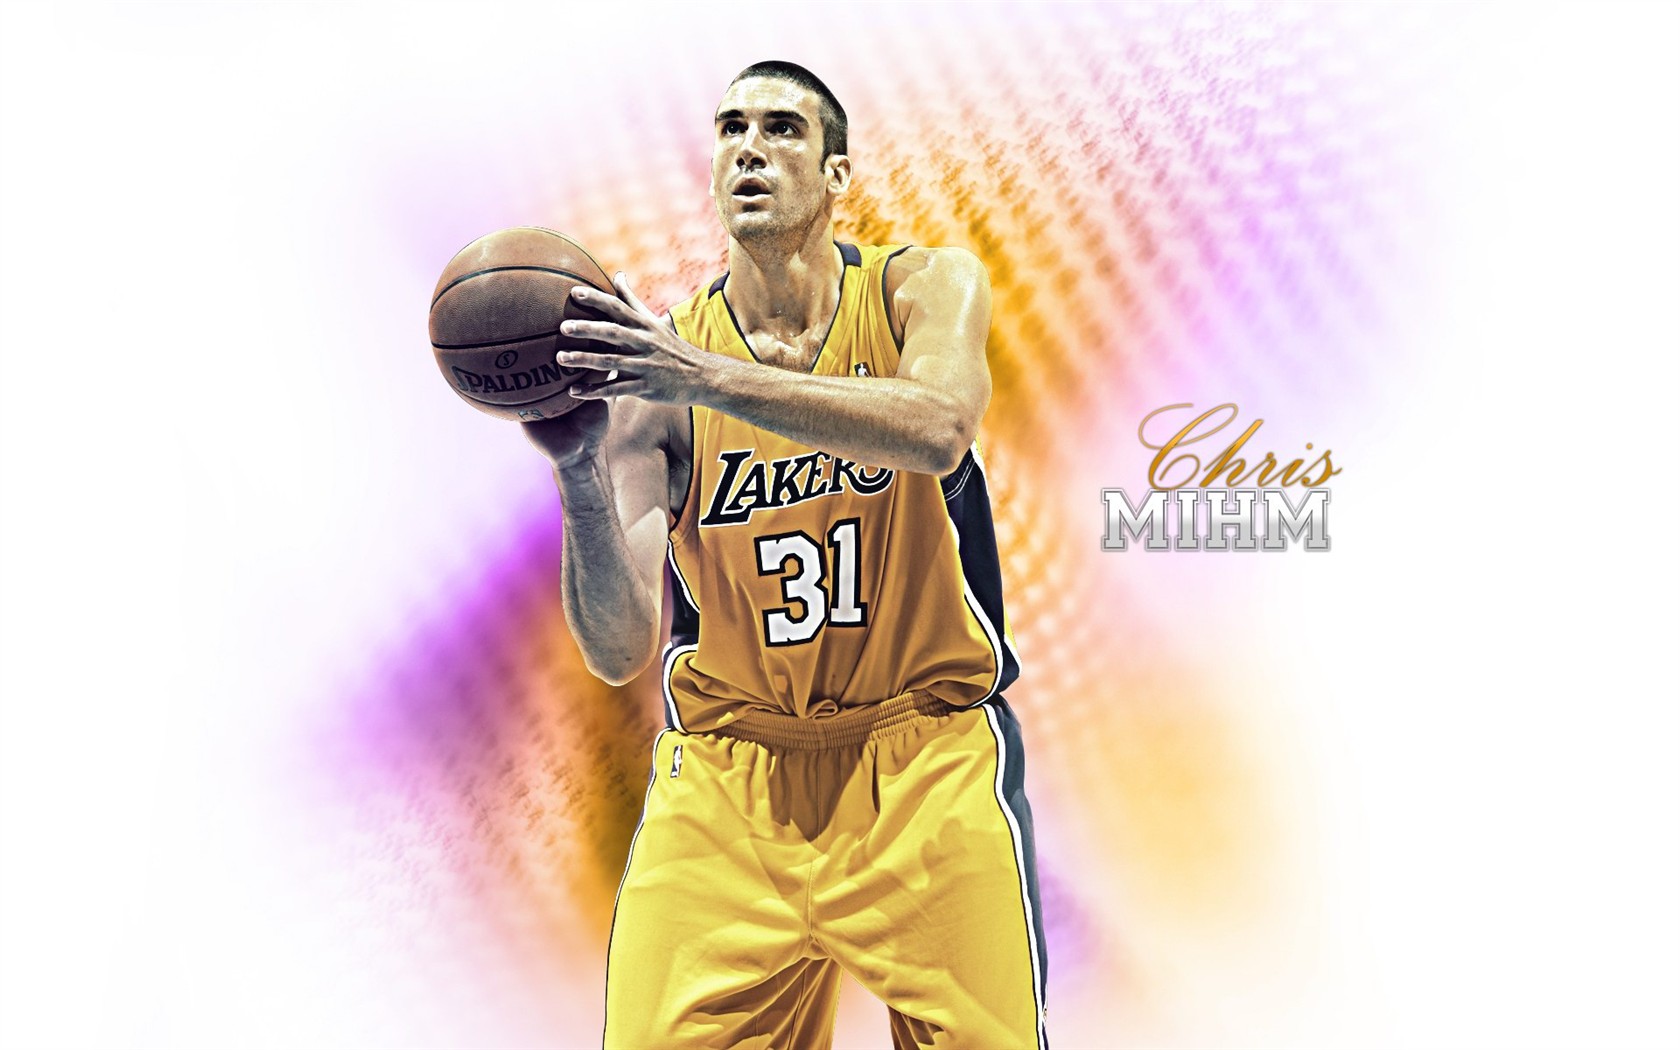 Los Angeles Lakers Official Wallpaper #5 - 1680x1050